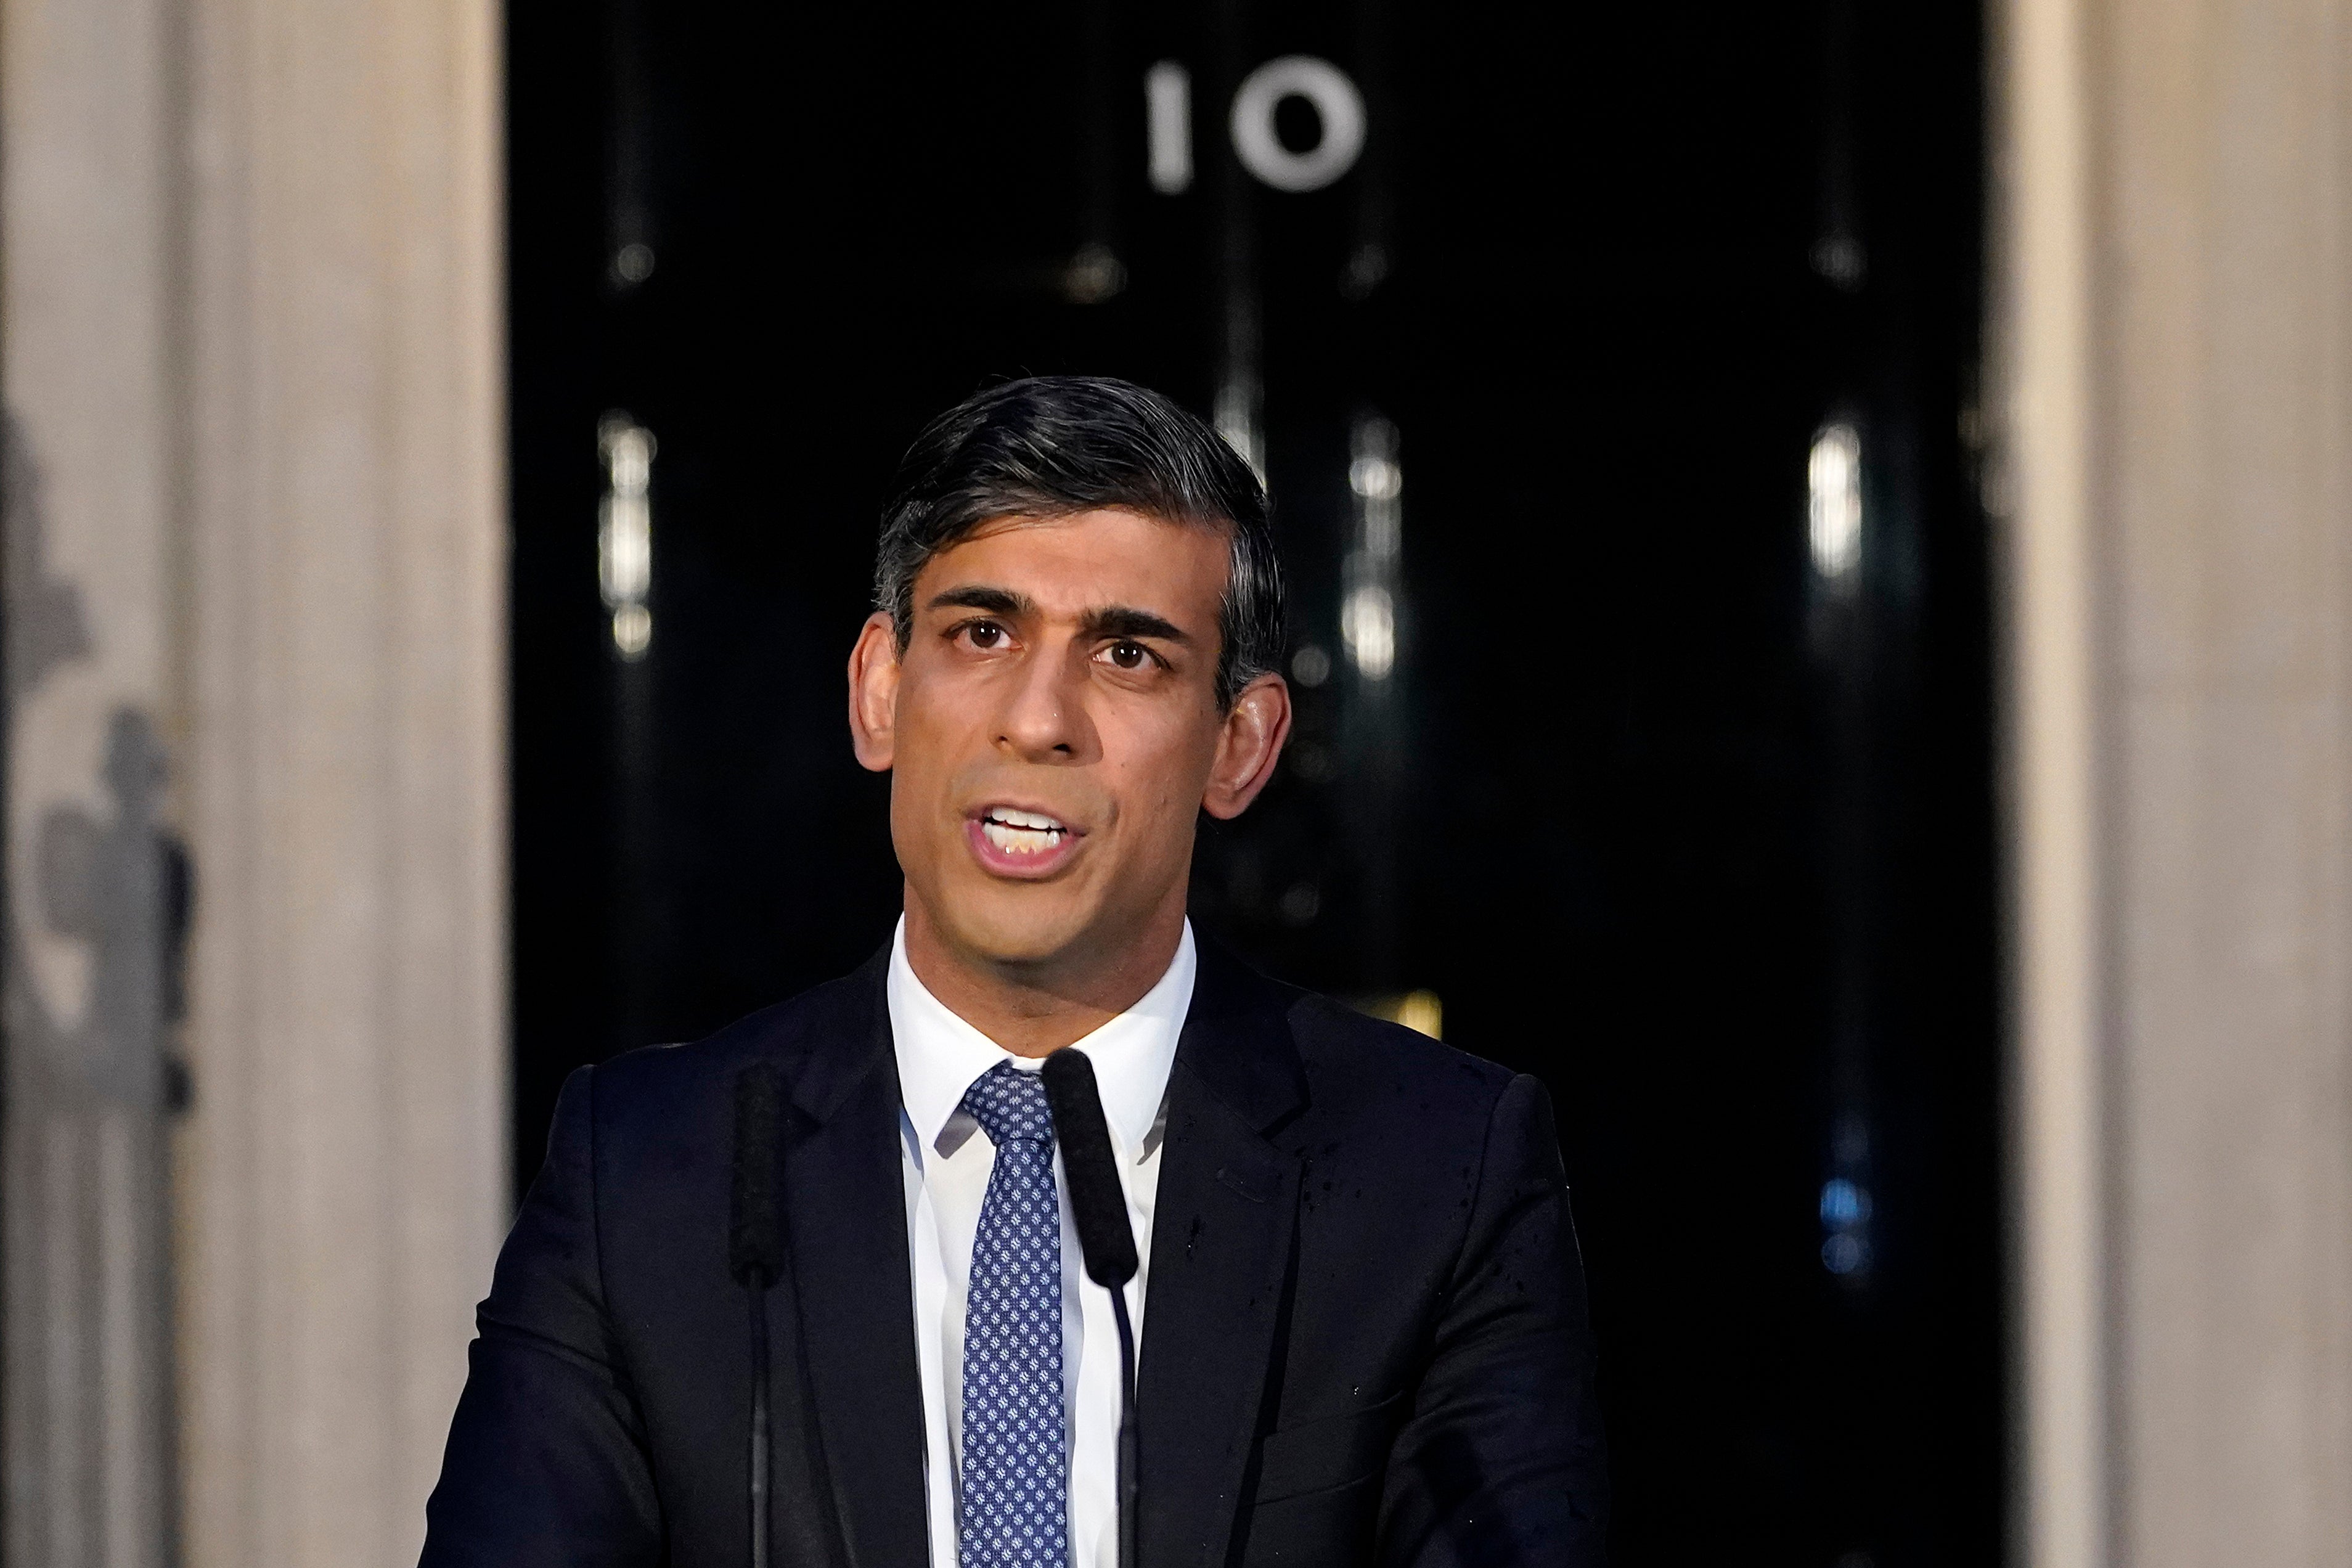 Rishi Sunak said the situation in Gaza is growing “increasingly intolerable”